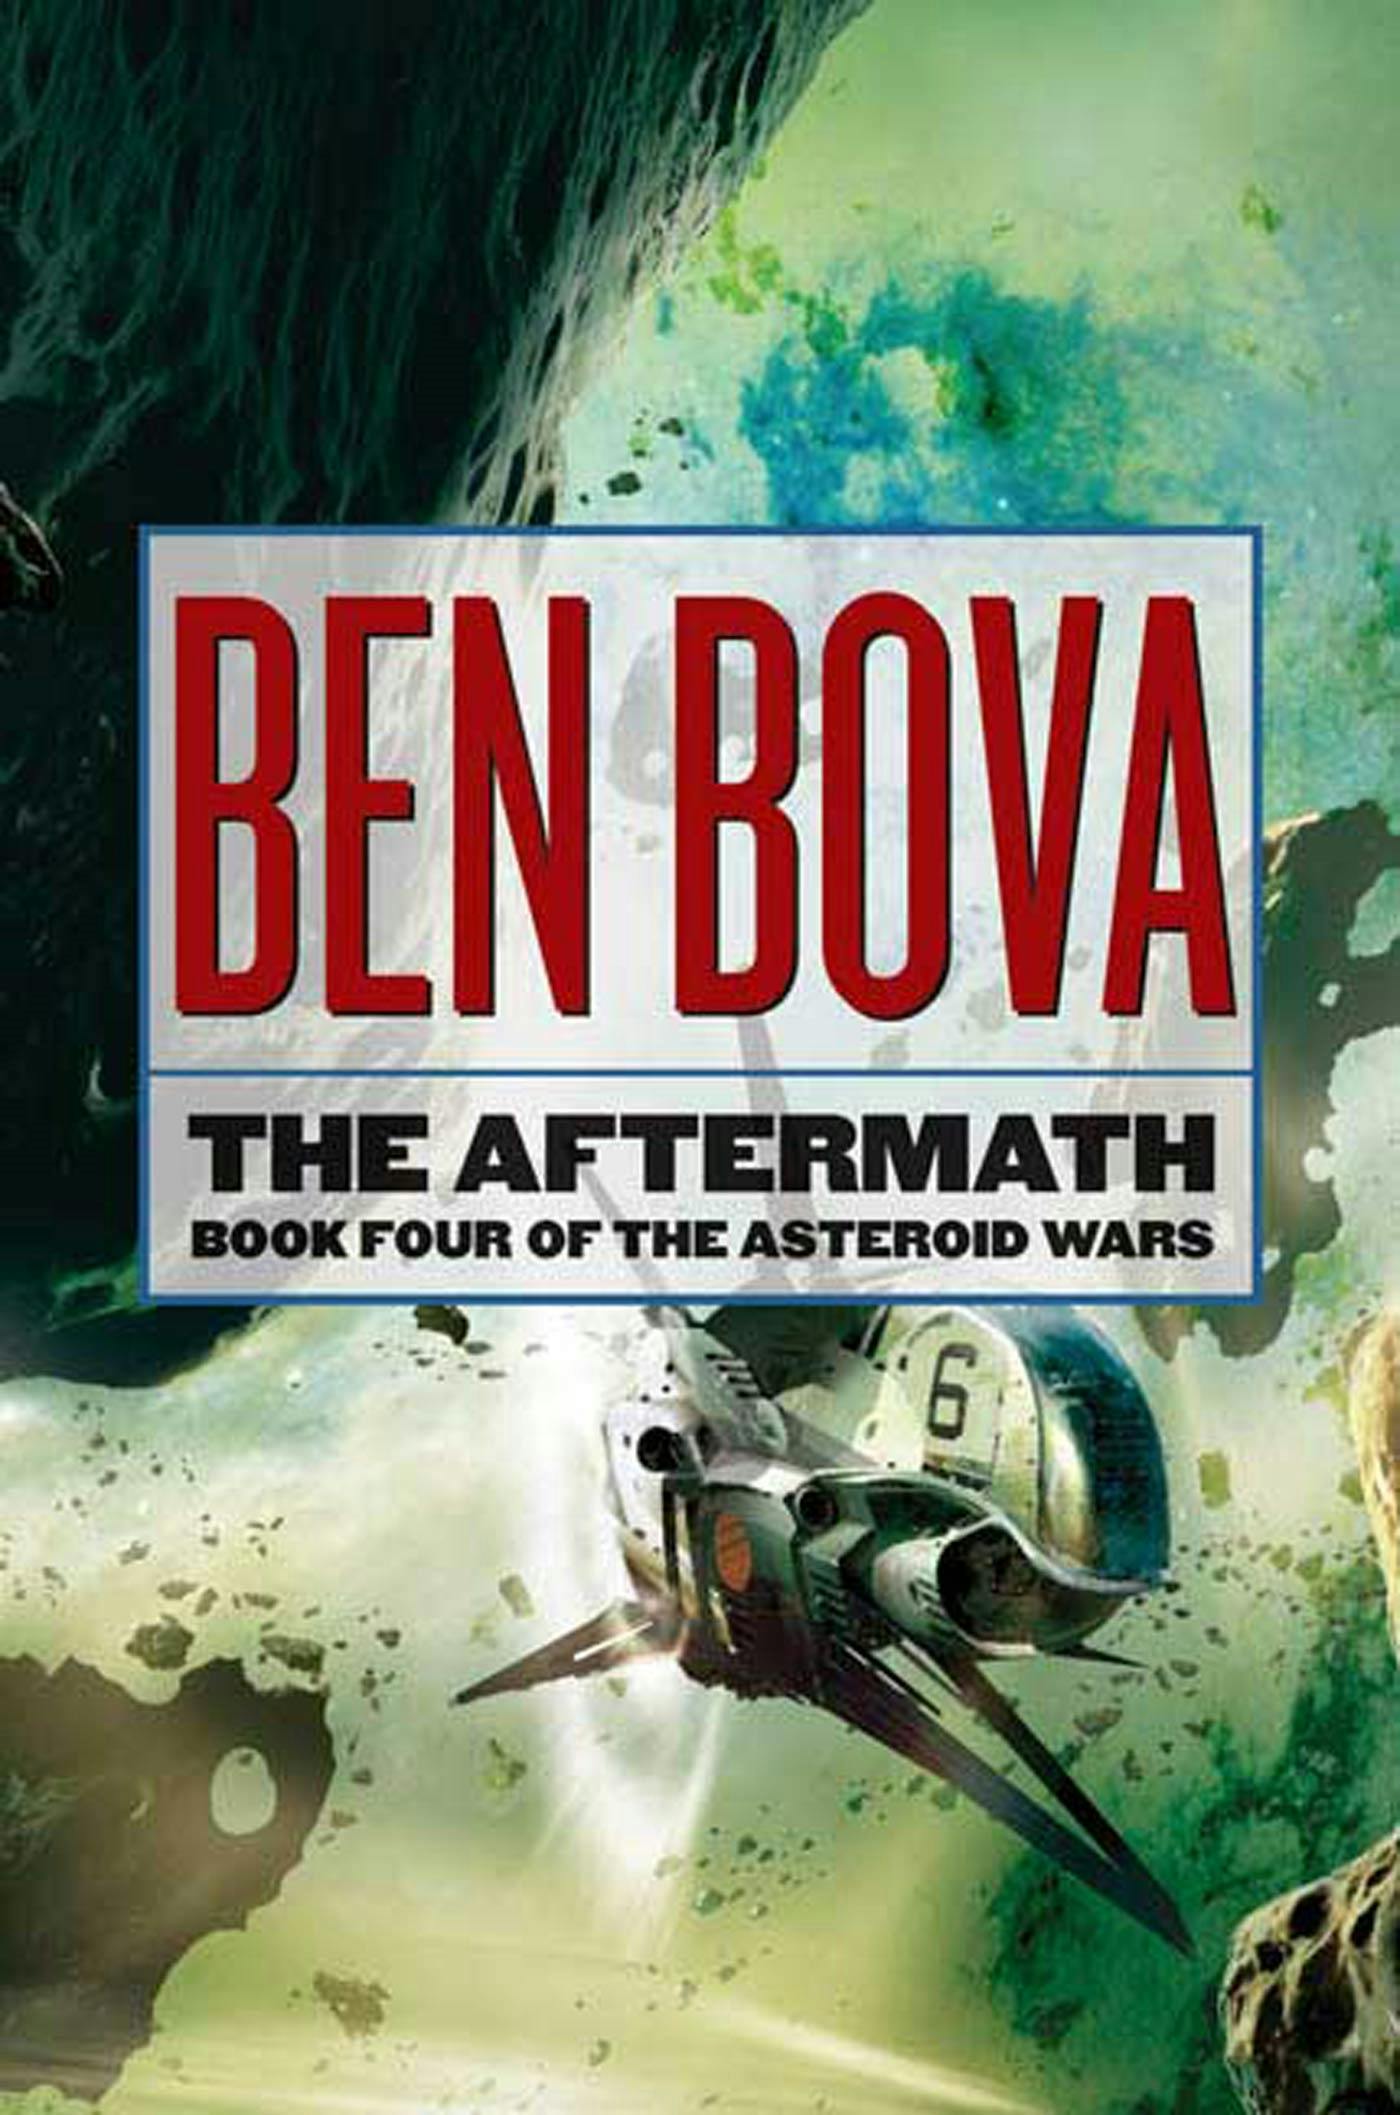 Cover for the book titled as: The Aftermath